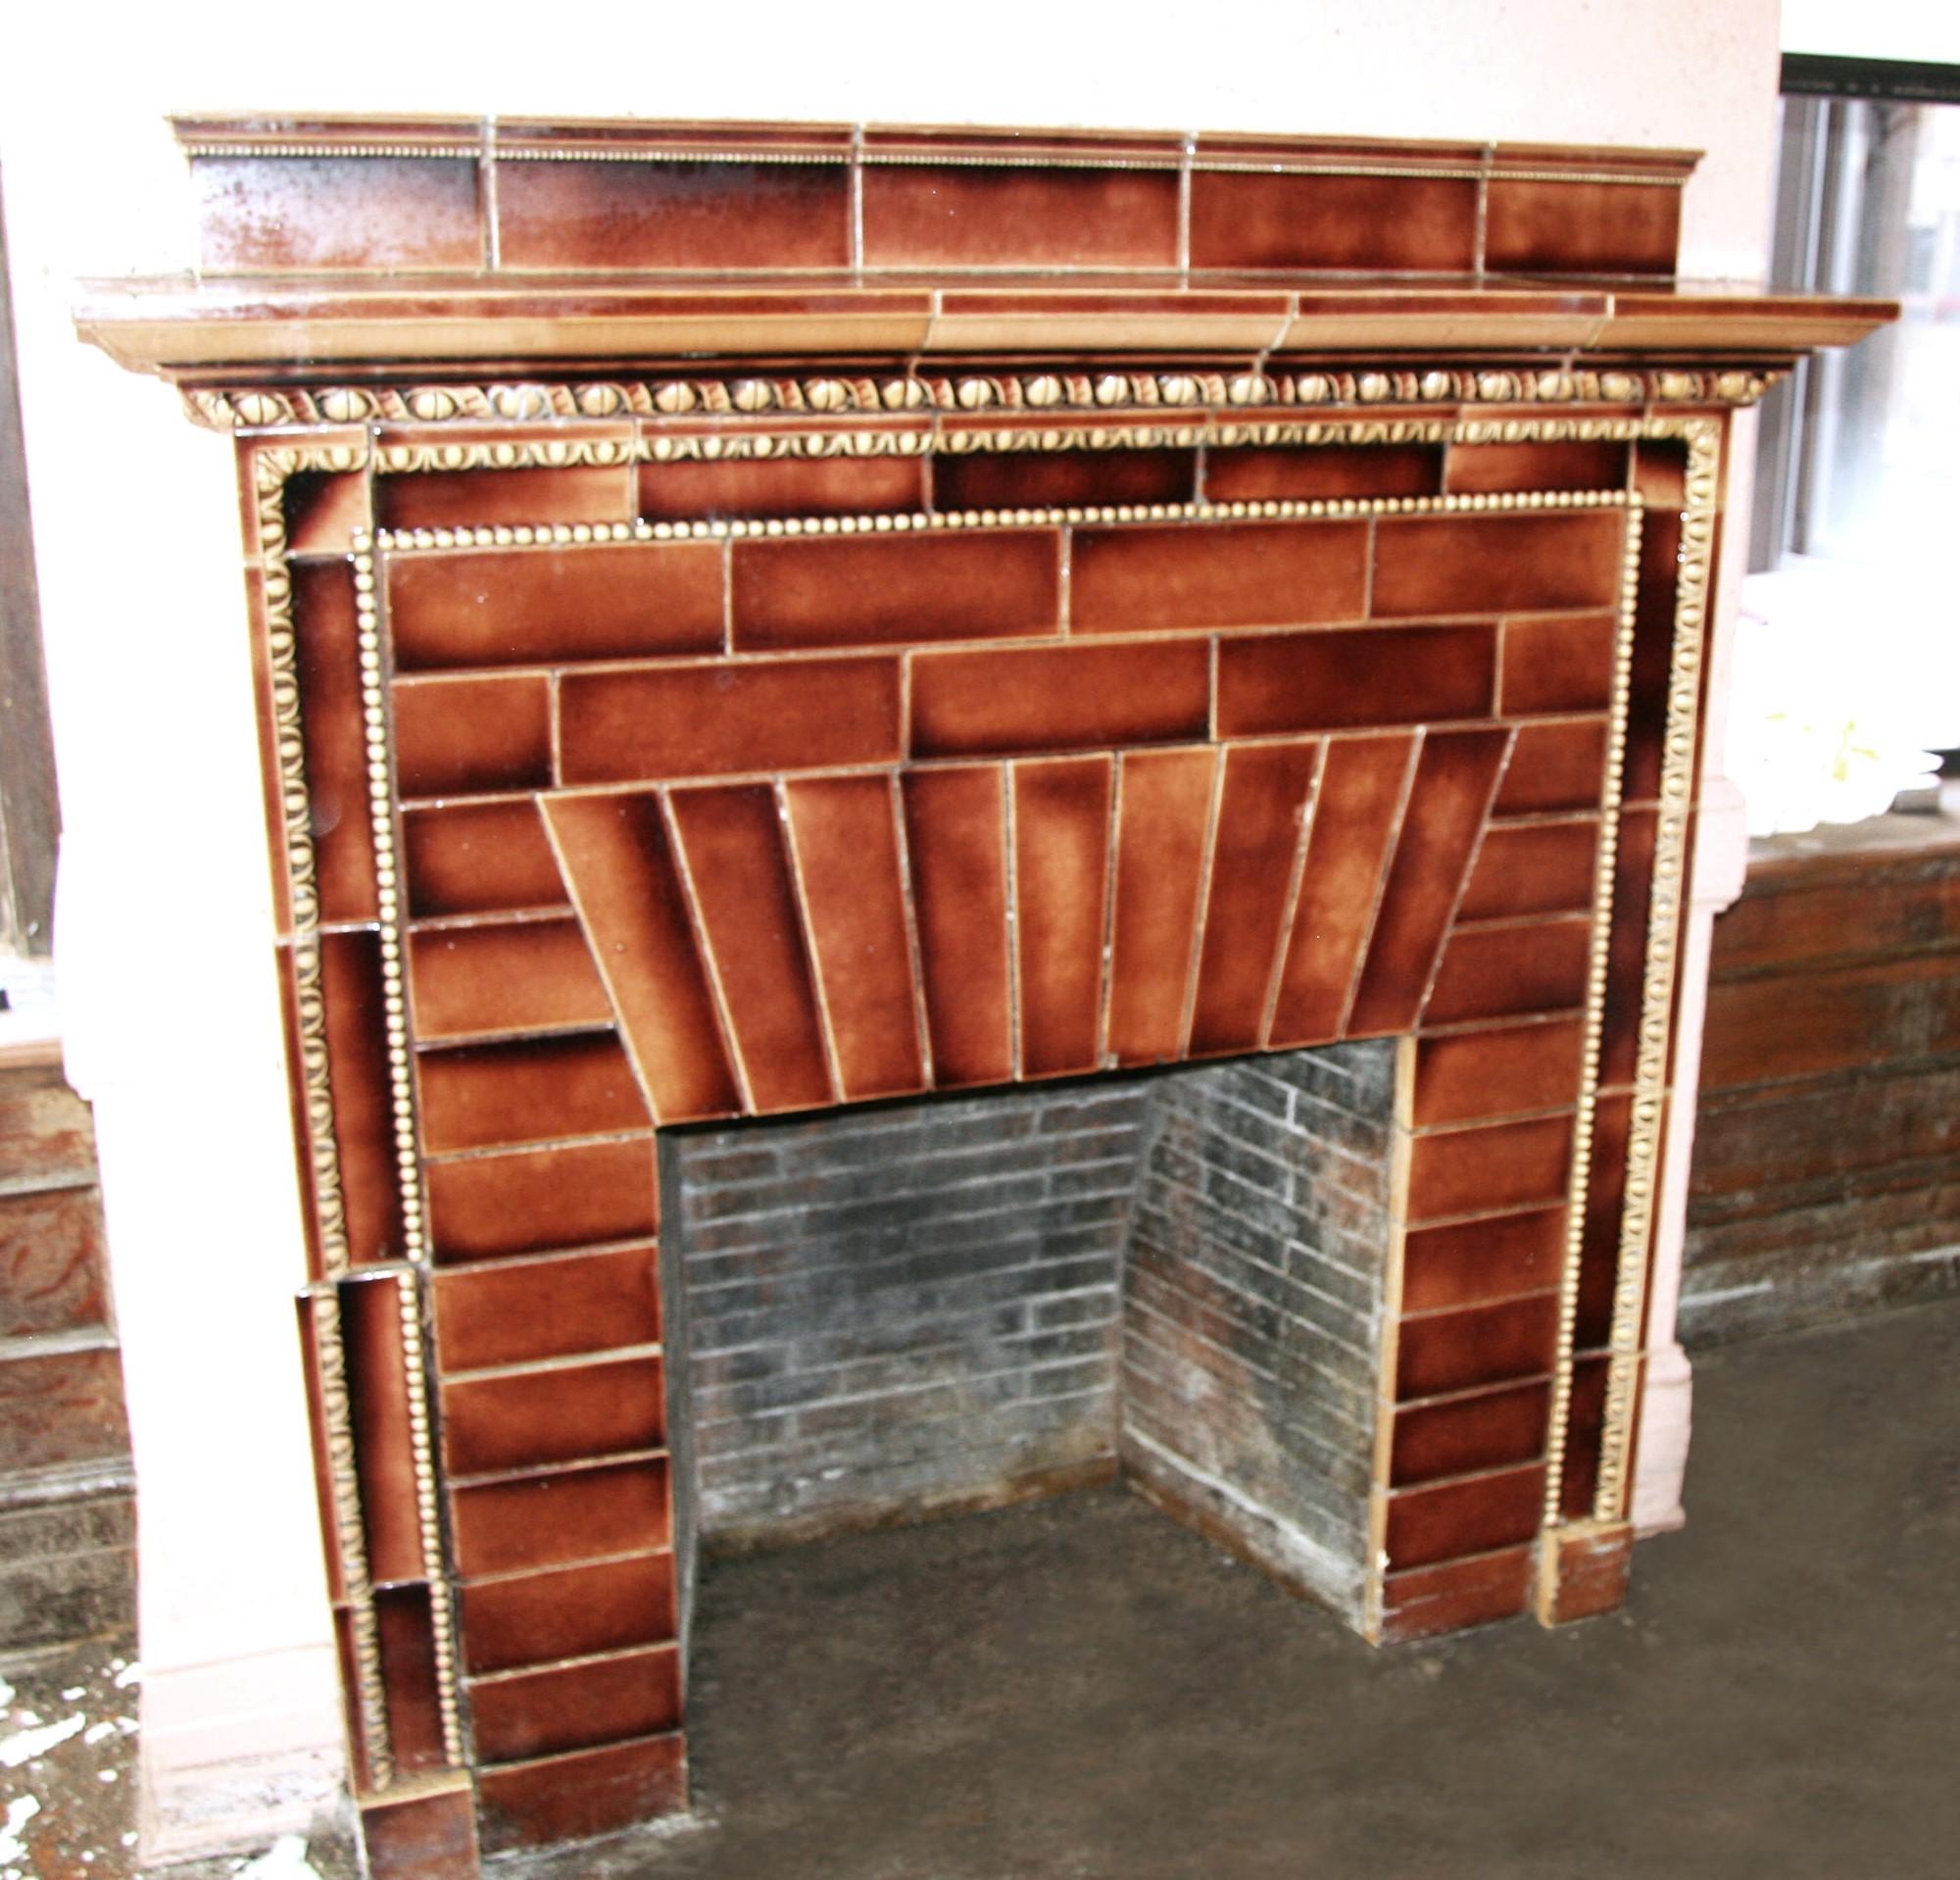 Ceramic Mantel from the Iver Johnson Building, Fitchburg, MA 3